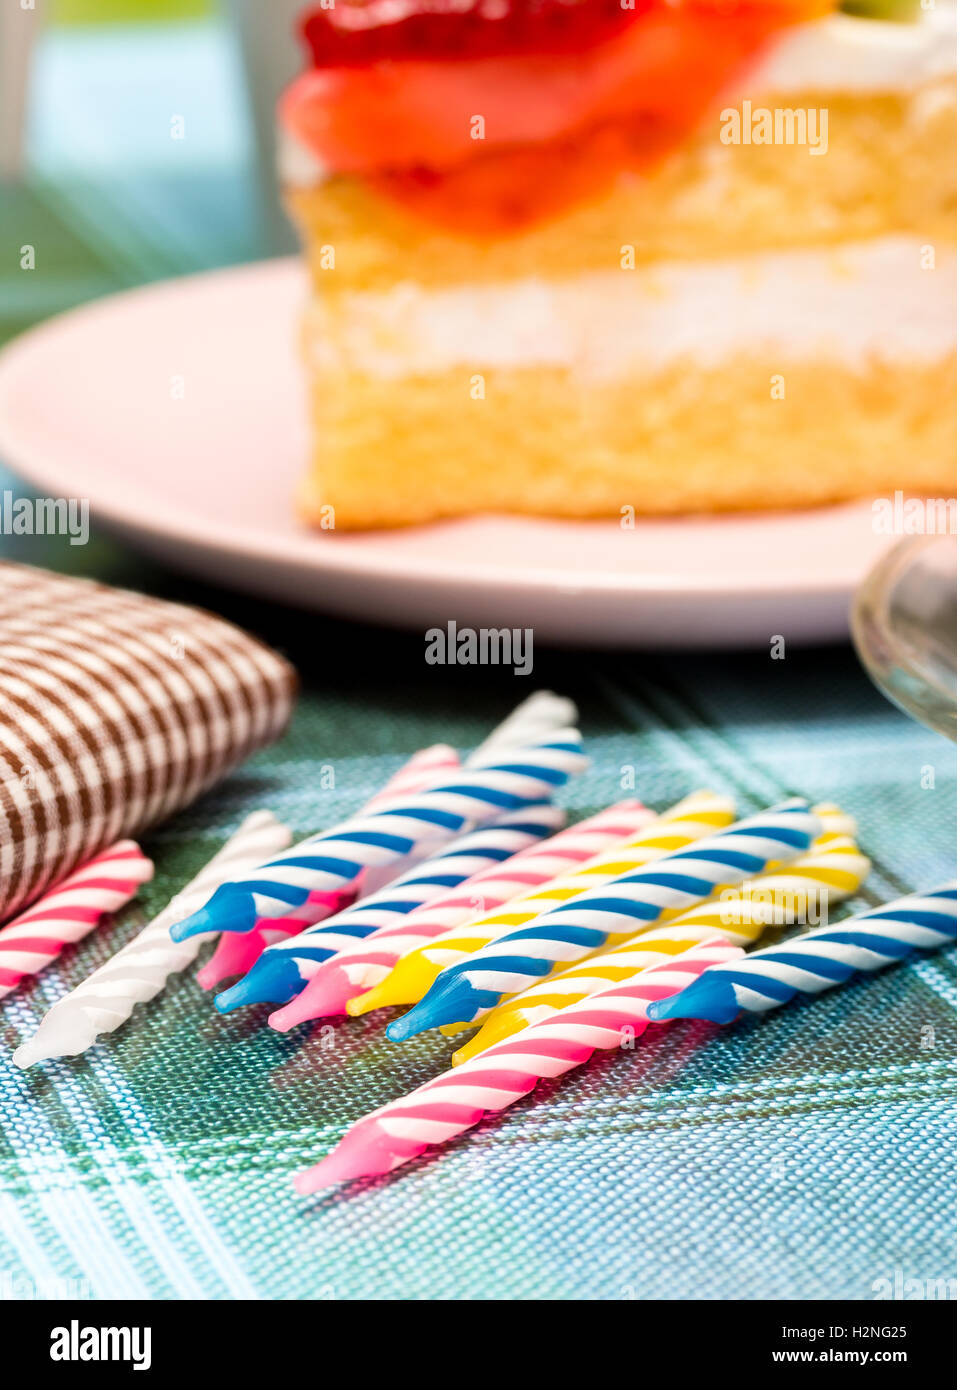 Birthday Candles Representing Delightful Celebrate And Cake Stock Photo